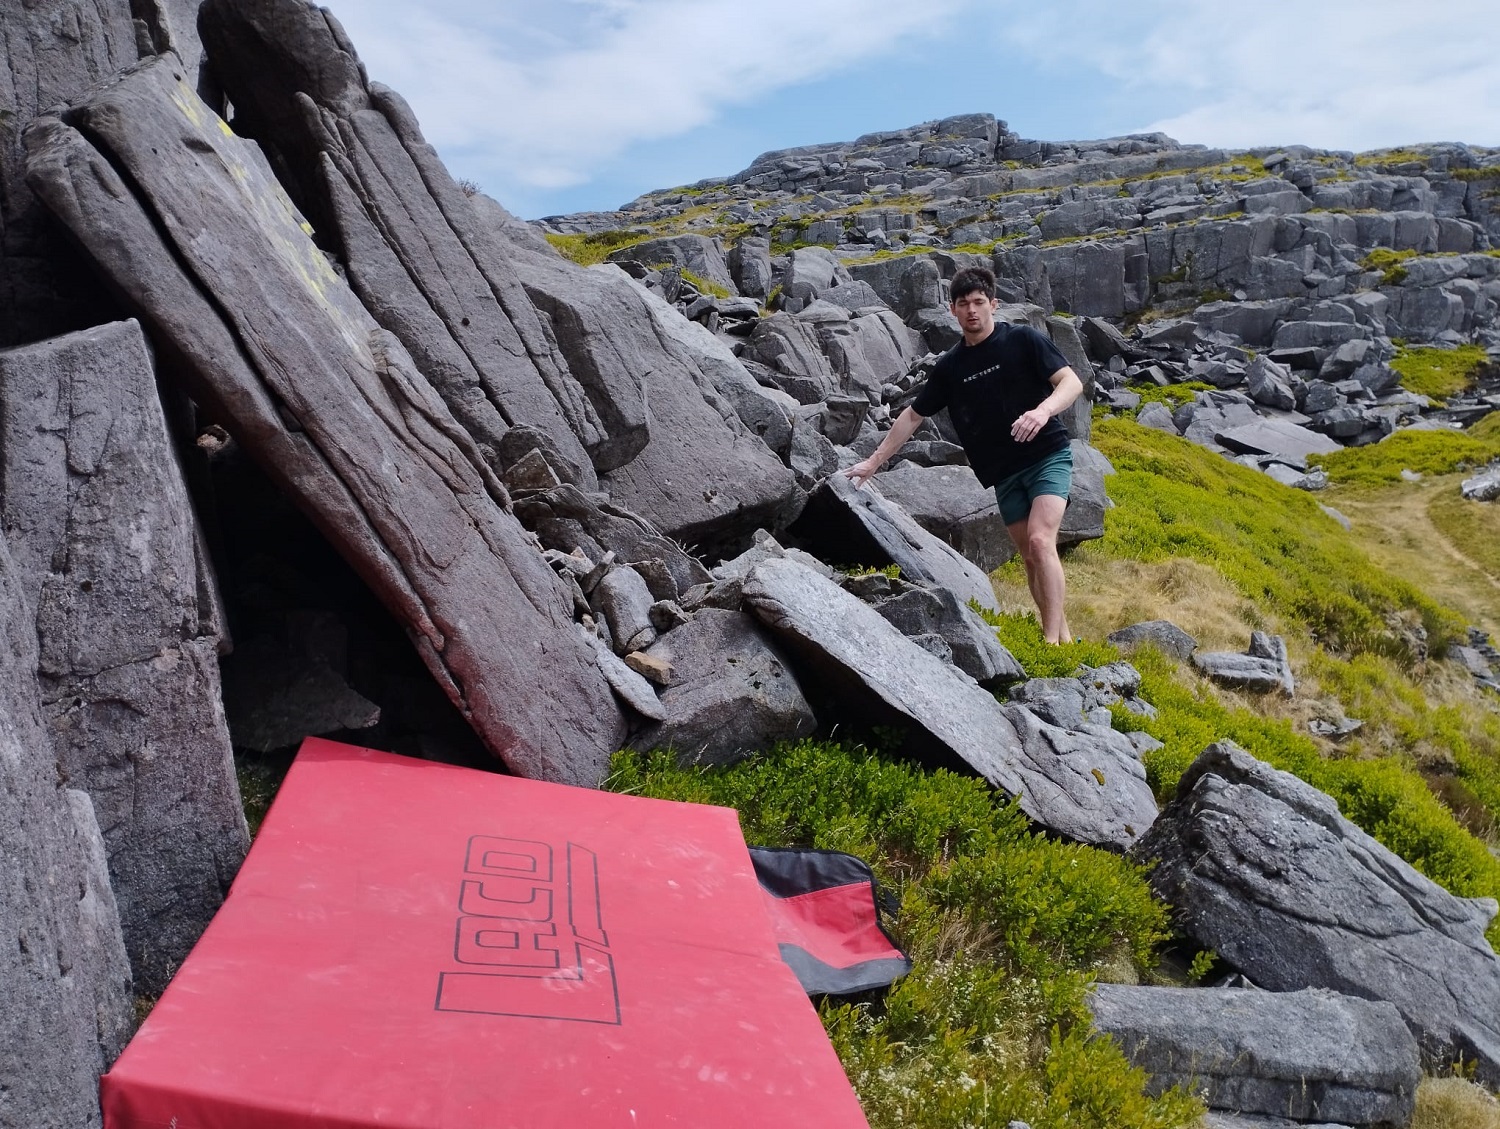 A person preparing to rock climb, with a red mattress at the foot of grey stone